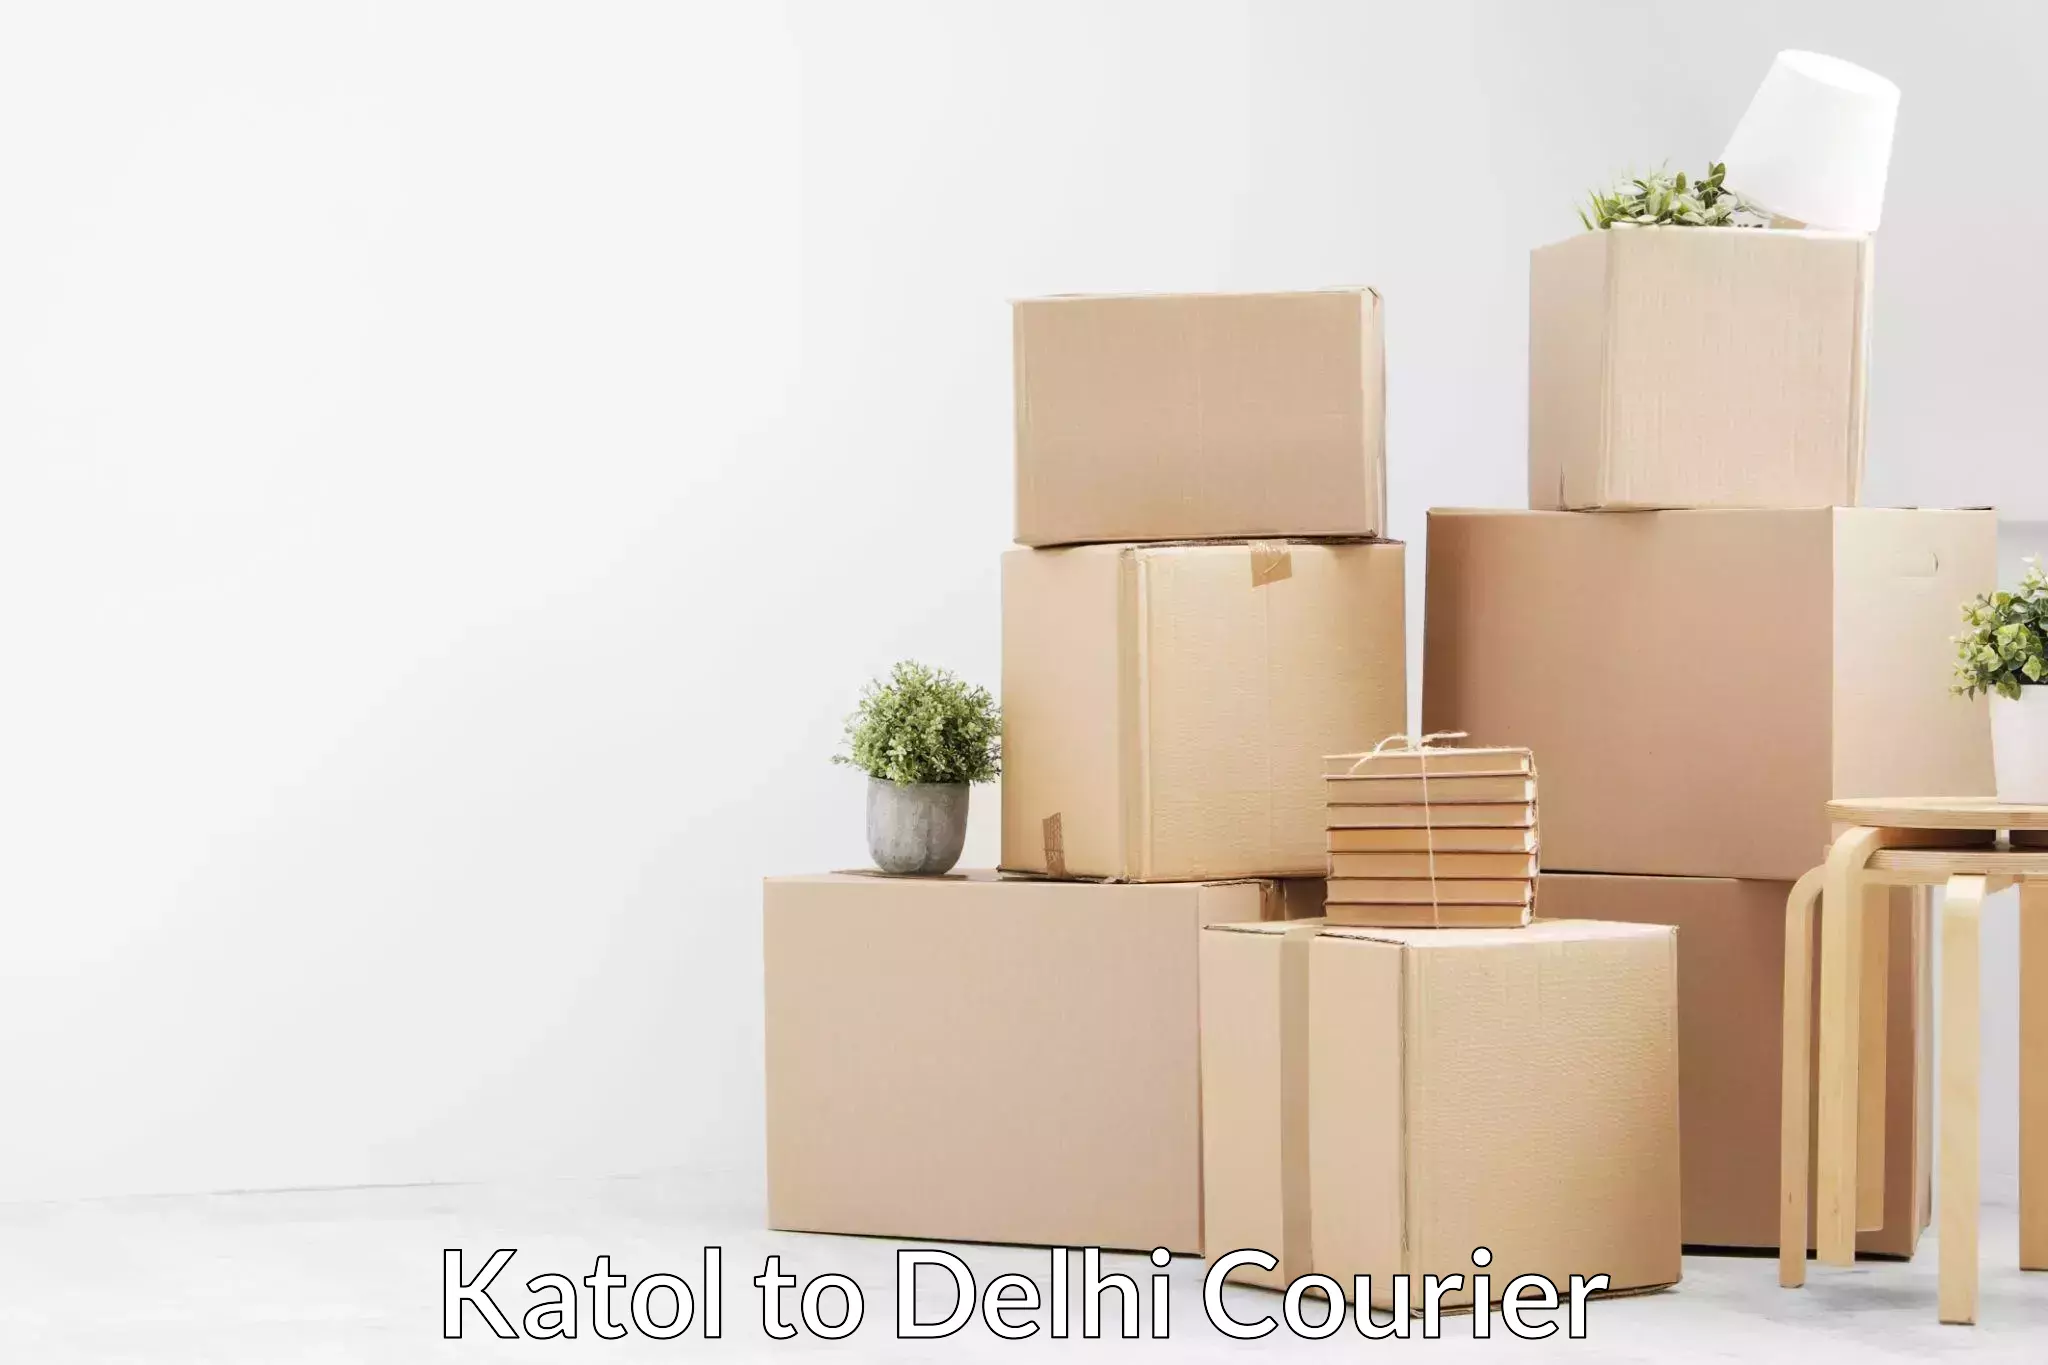 Home moving specialists Katol to University of Delhi